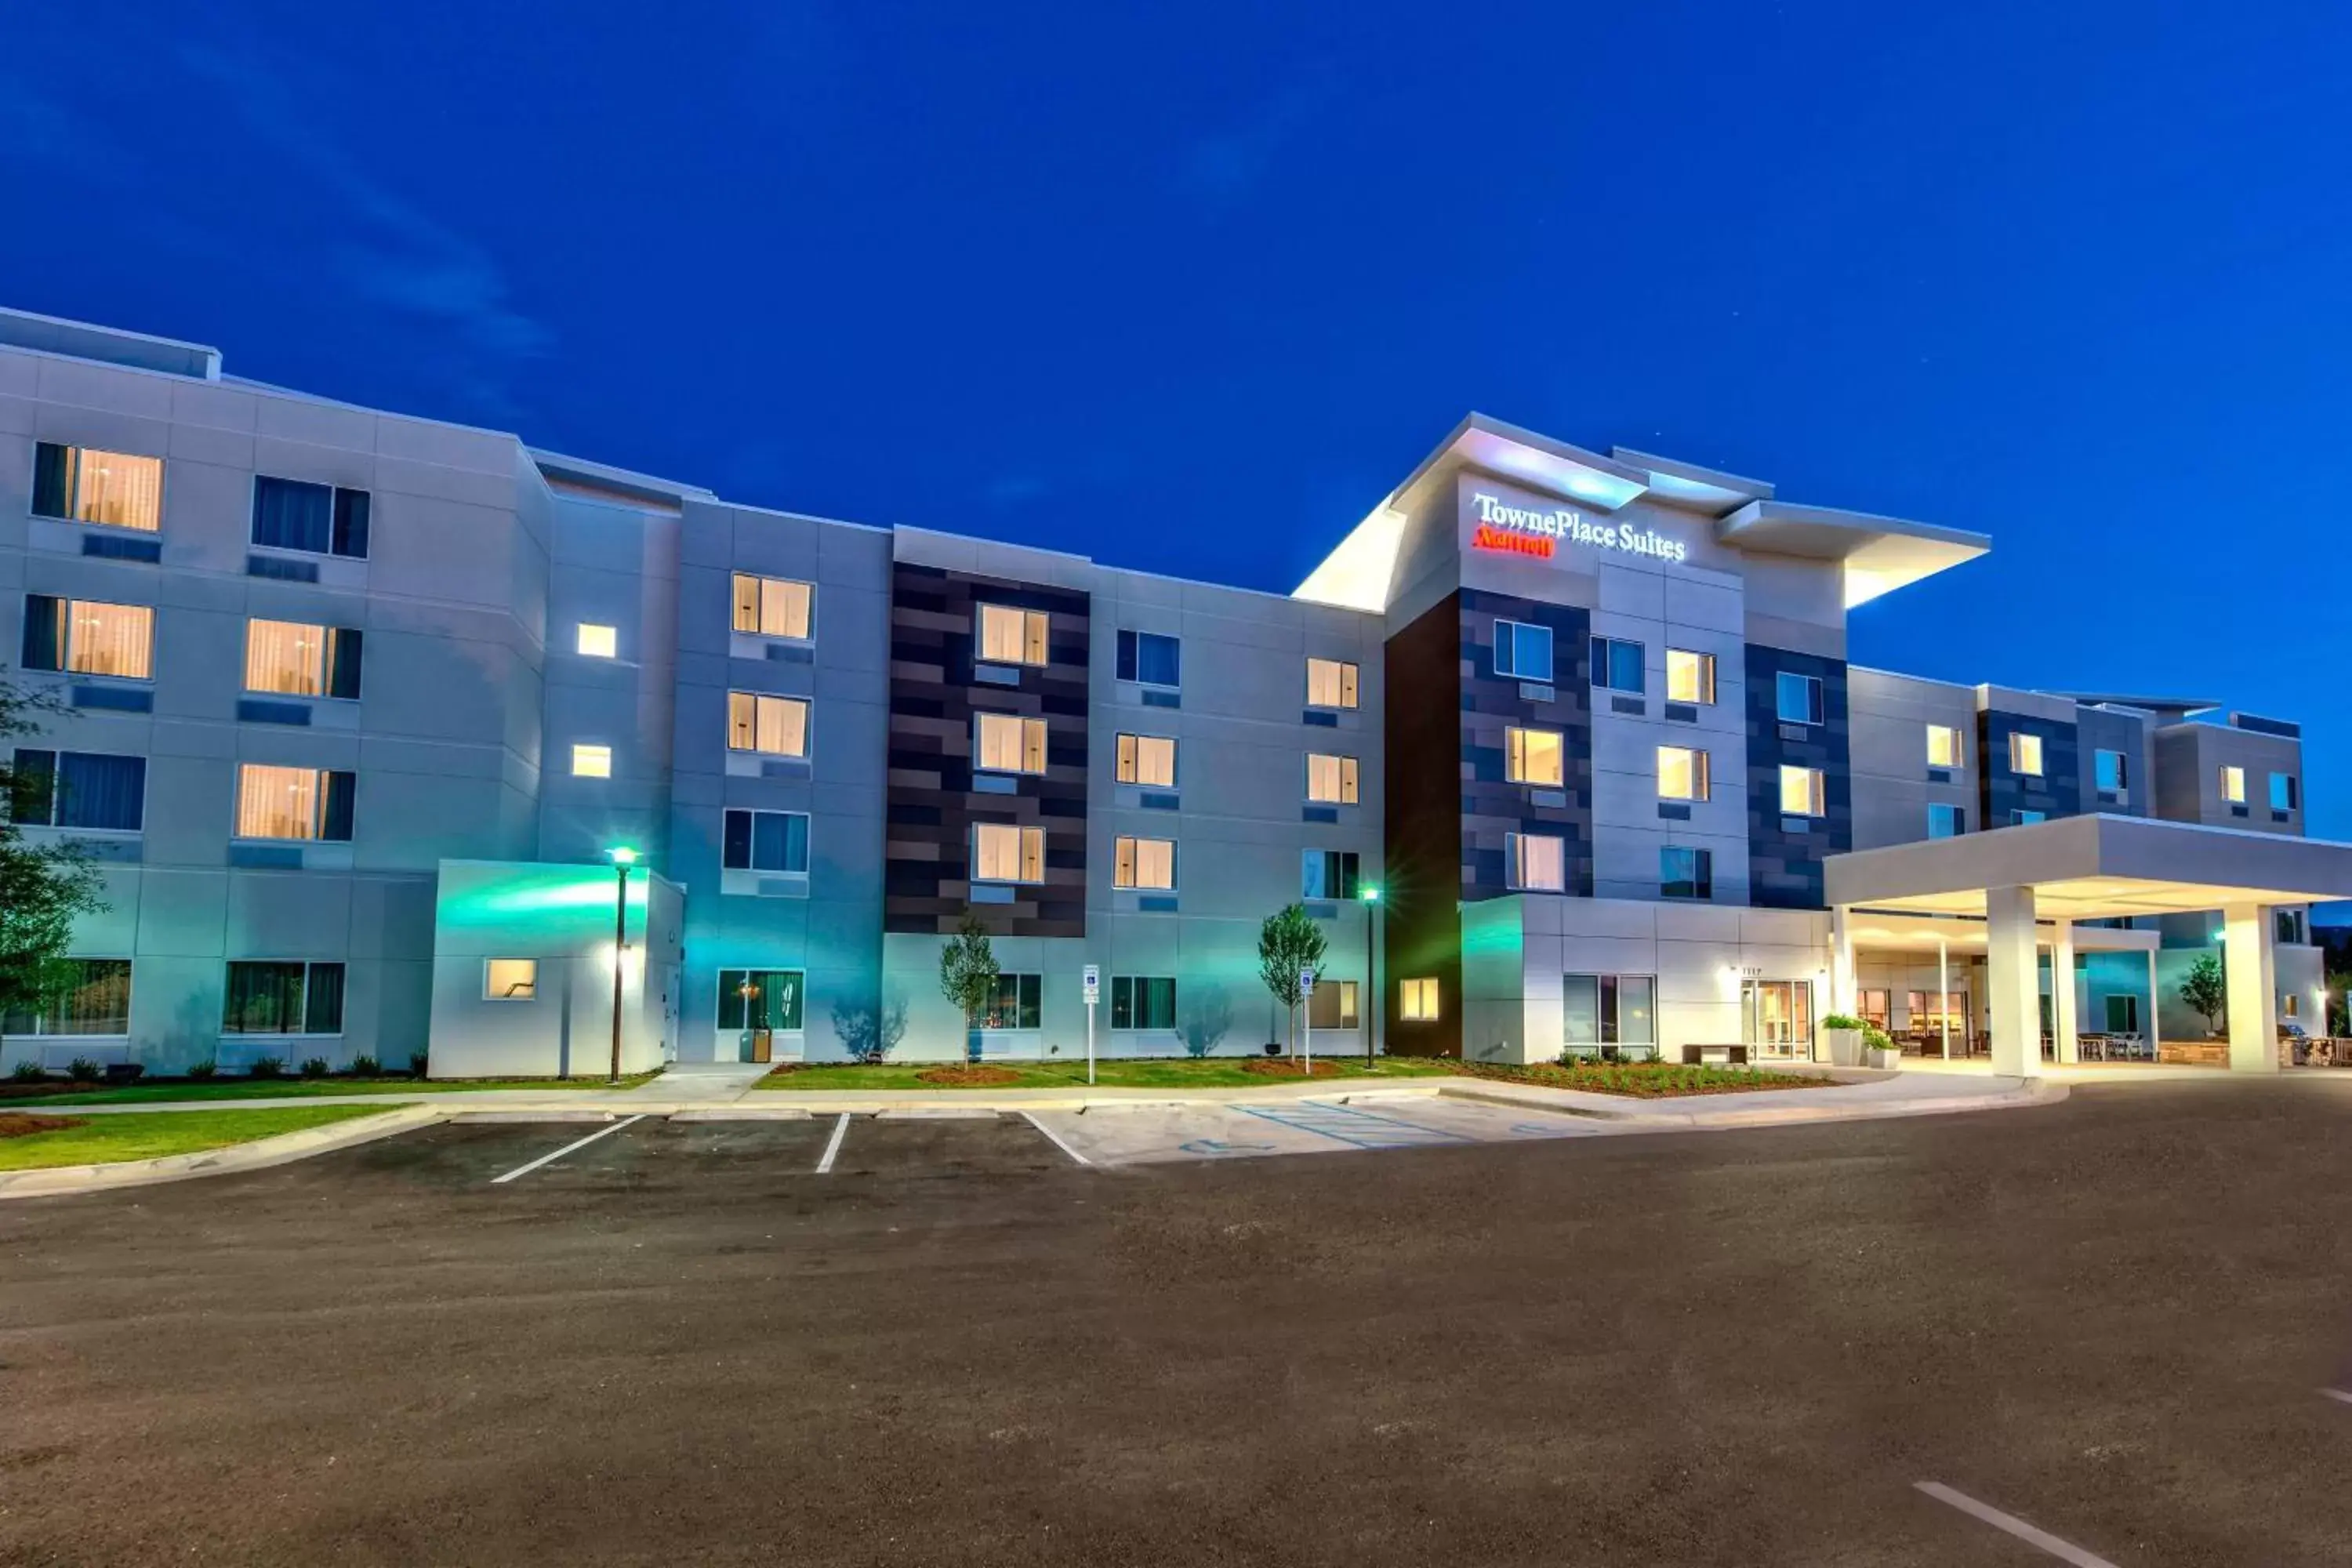 Property Building in TownePlace Suites by Marriott Auburn University Area